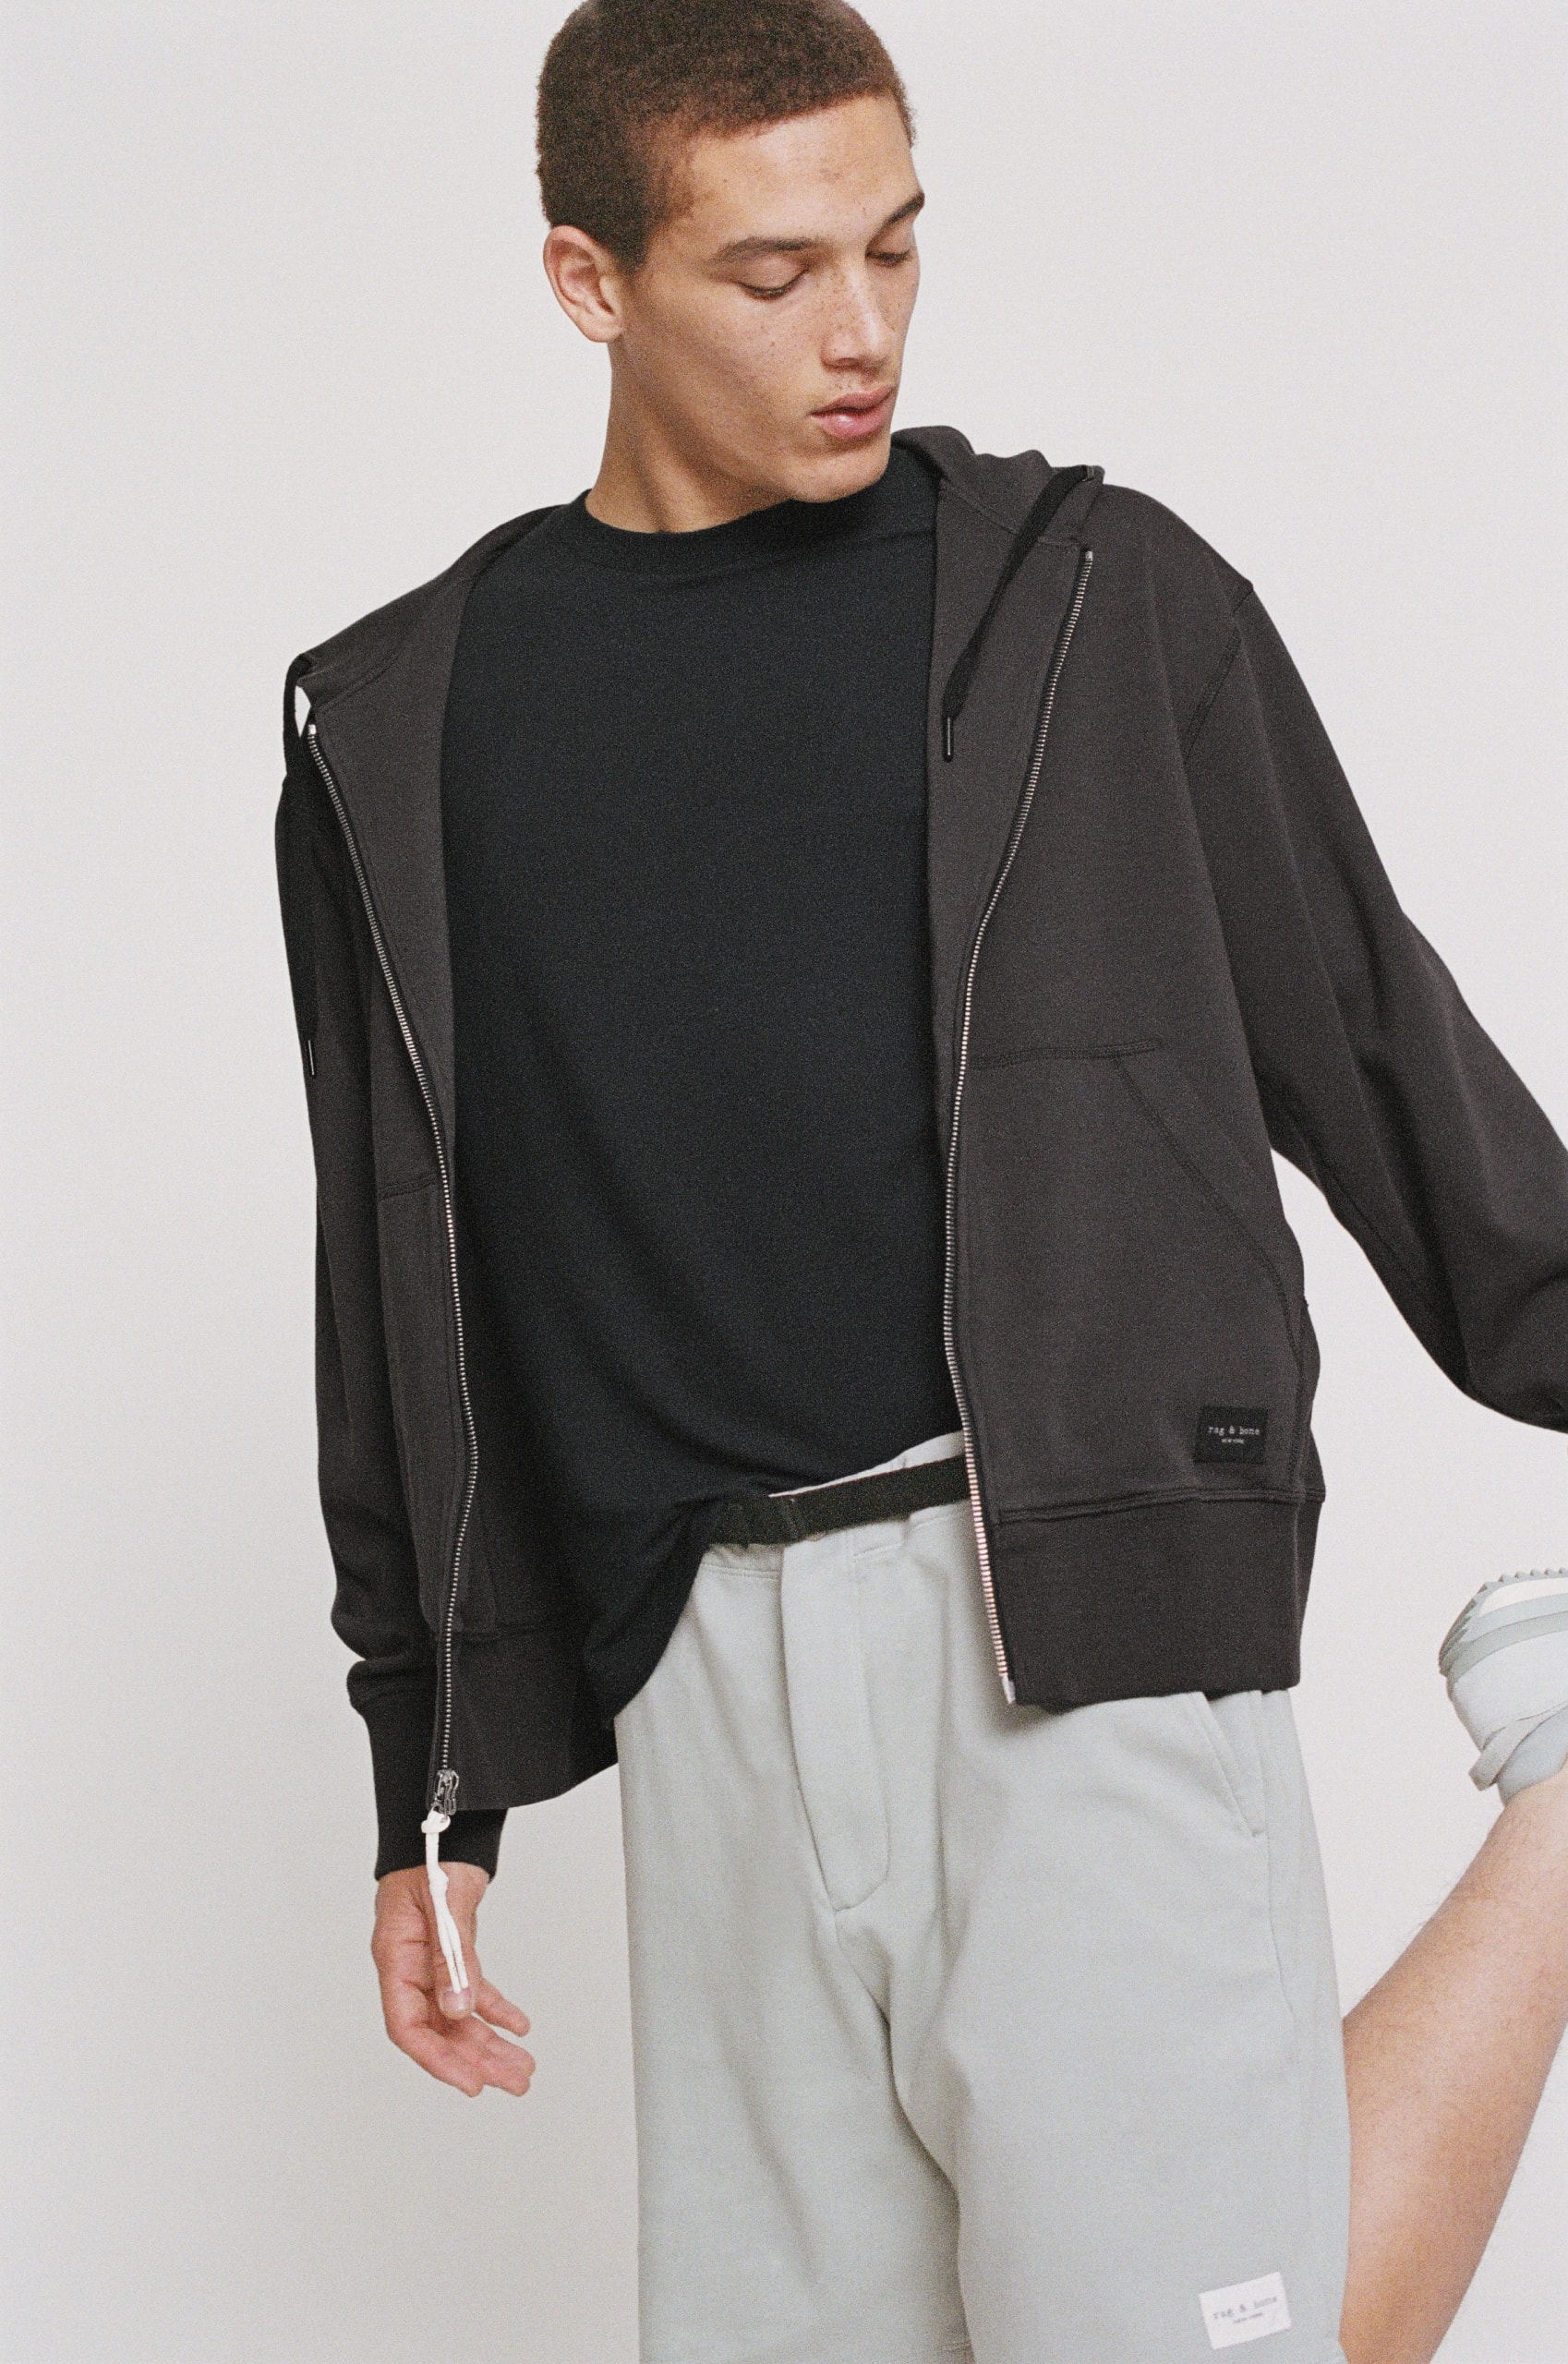 Rag & Bone’s New Sports-Infused Capsule Collection Stretches the Brand’s Territory 